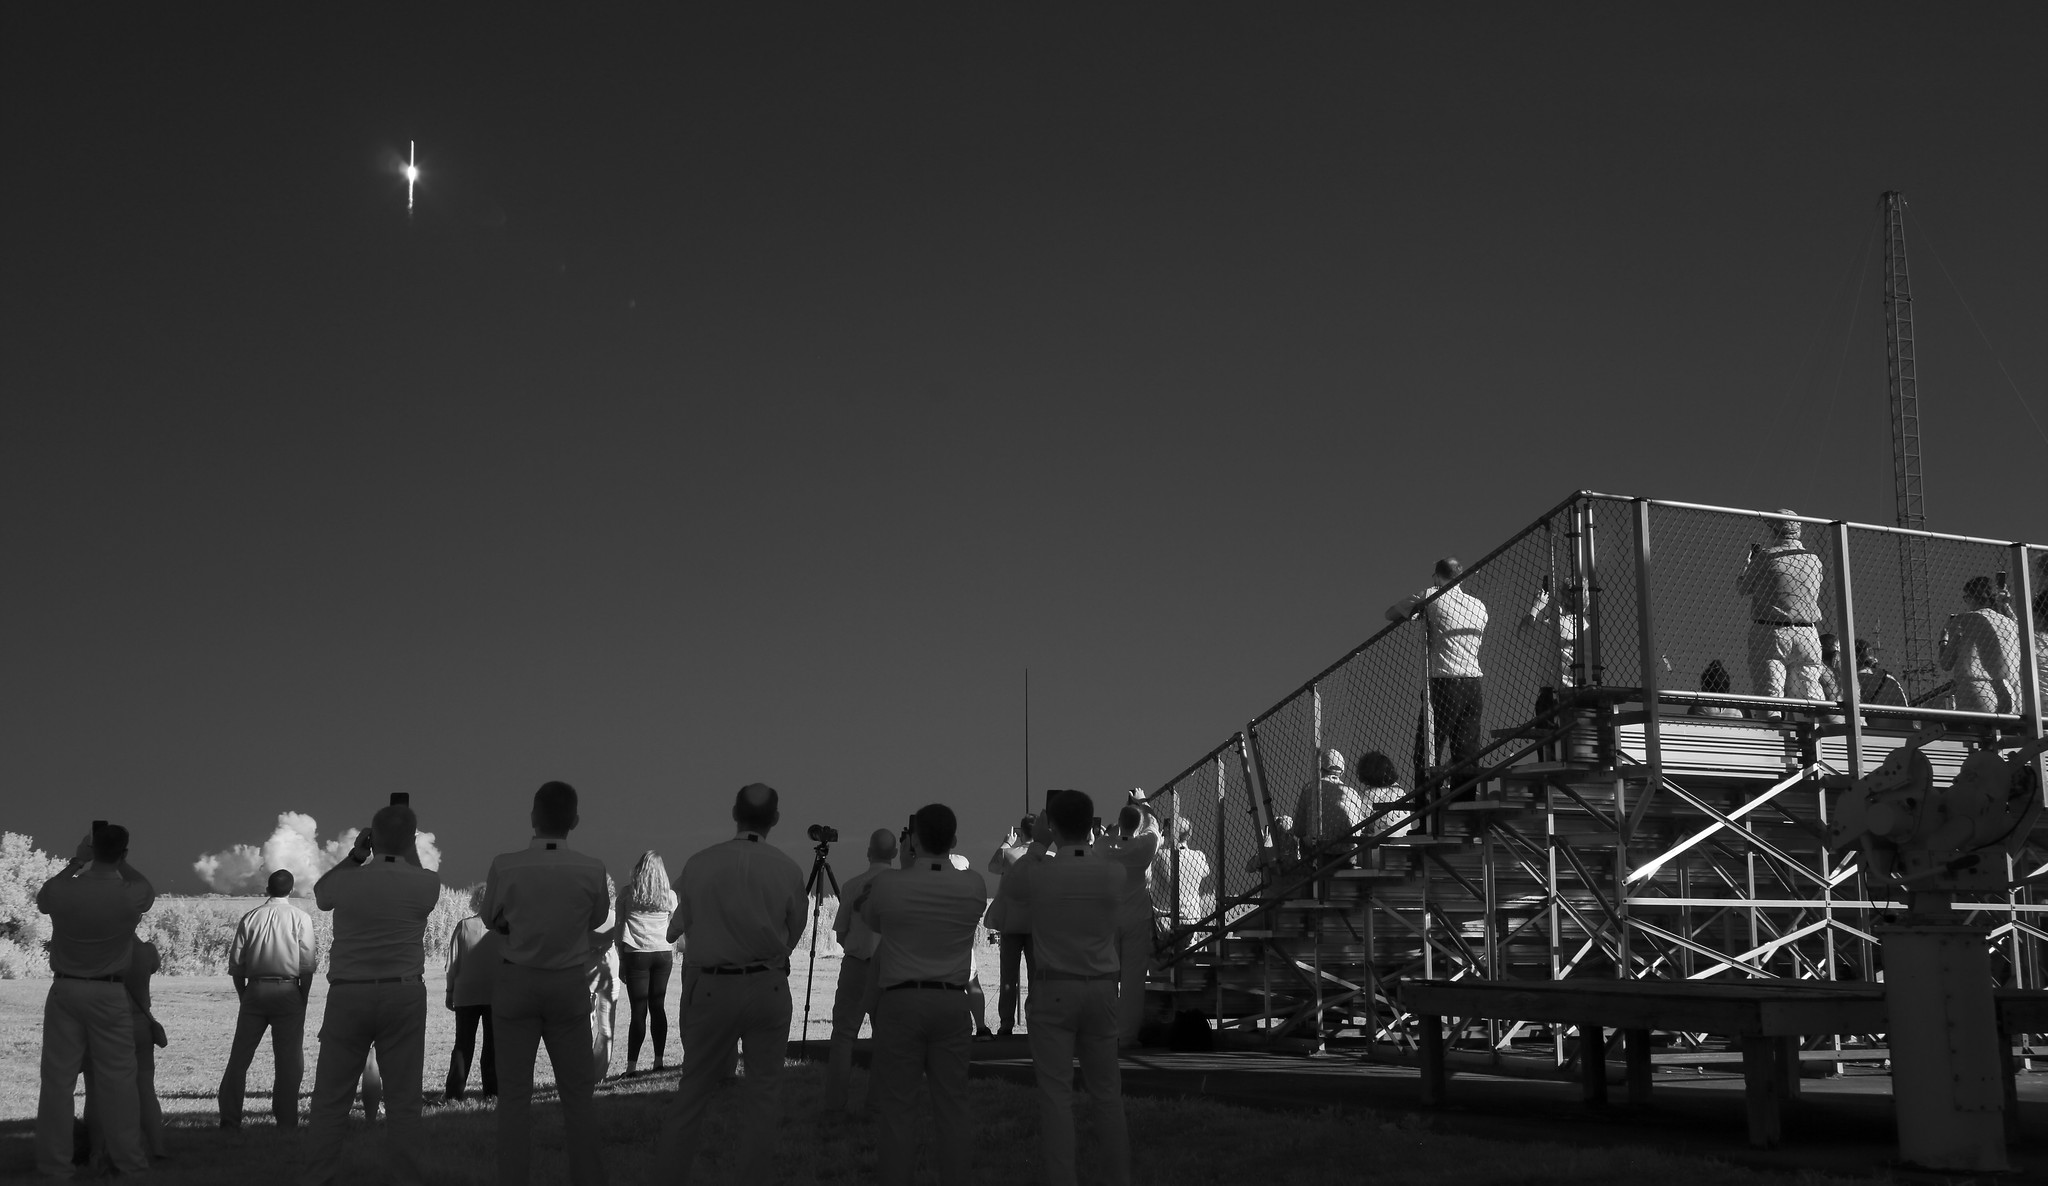 A black and white photo of bleachers with people watching a rocket launching in the background.